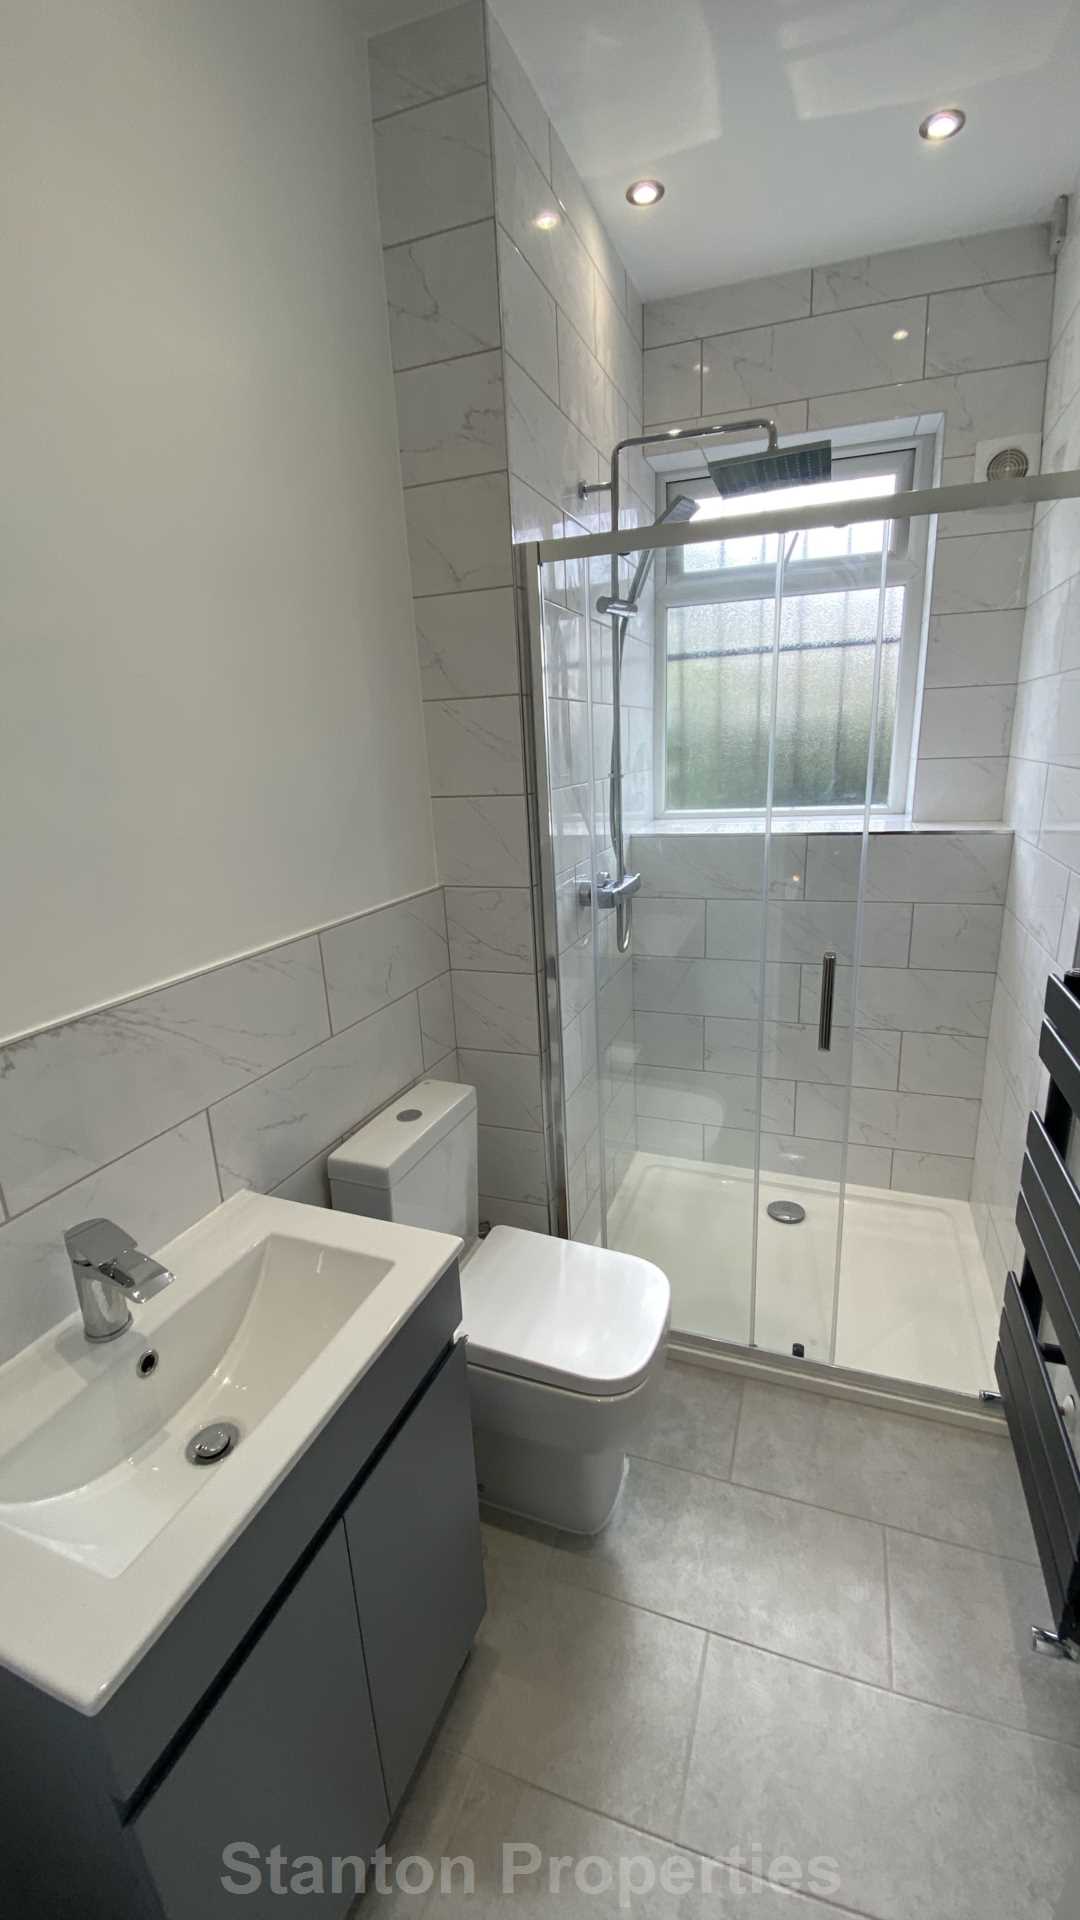 £130 pppw, Moseley Road, Fallowfield, M14 6NR, Image 23